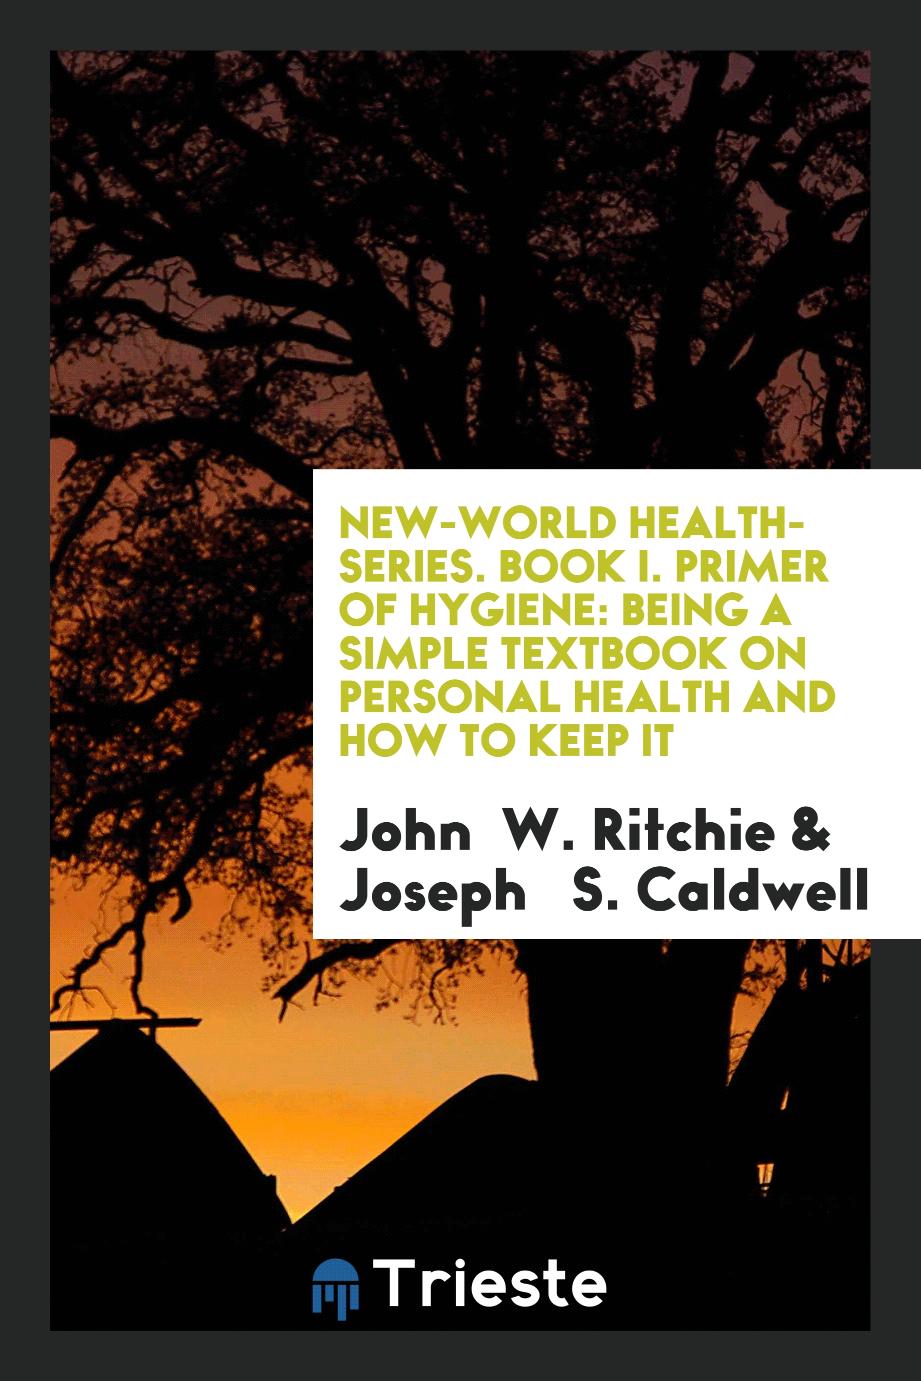 New-World Health-Series. Book I. Primer of Hygiene: Being a Simple Textbook on Personal Health and How to Keep It